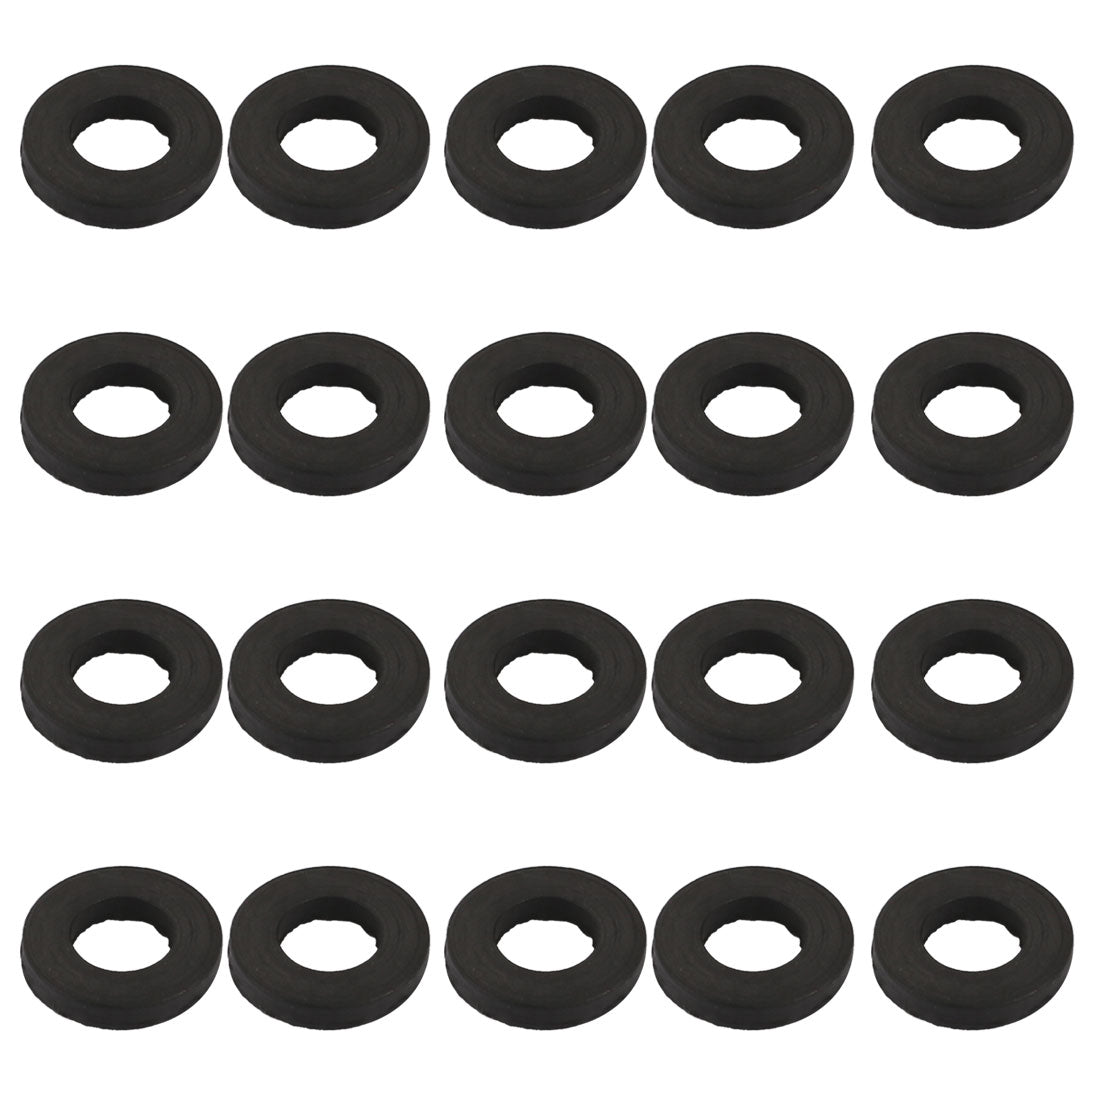 Uxcell Uxcell 20pcs Black Rubber Round Flat Washer Assortment Size 14x24x3mm Flat Washer